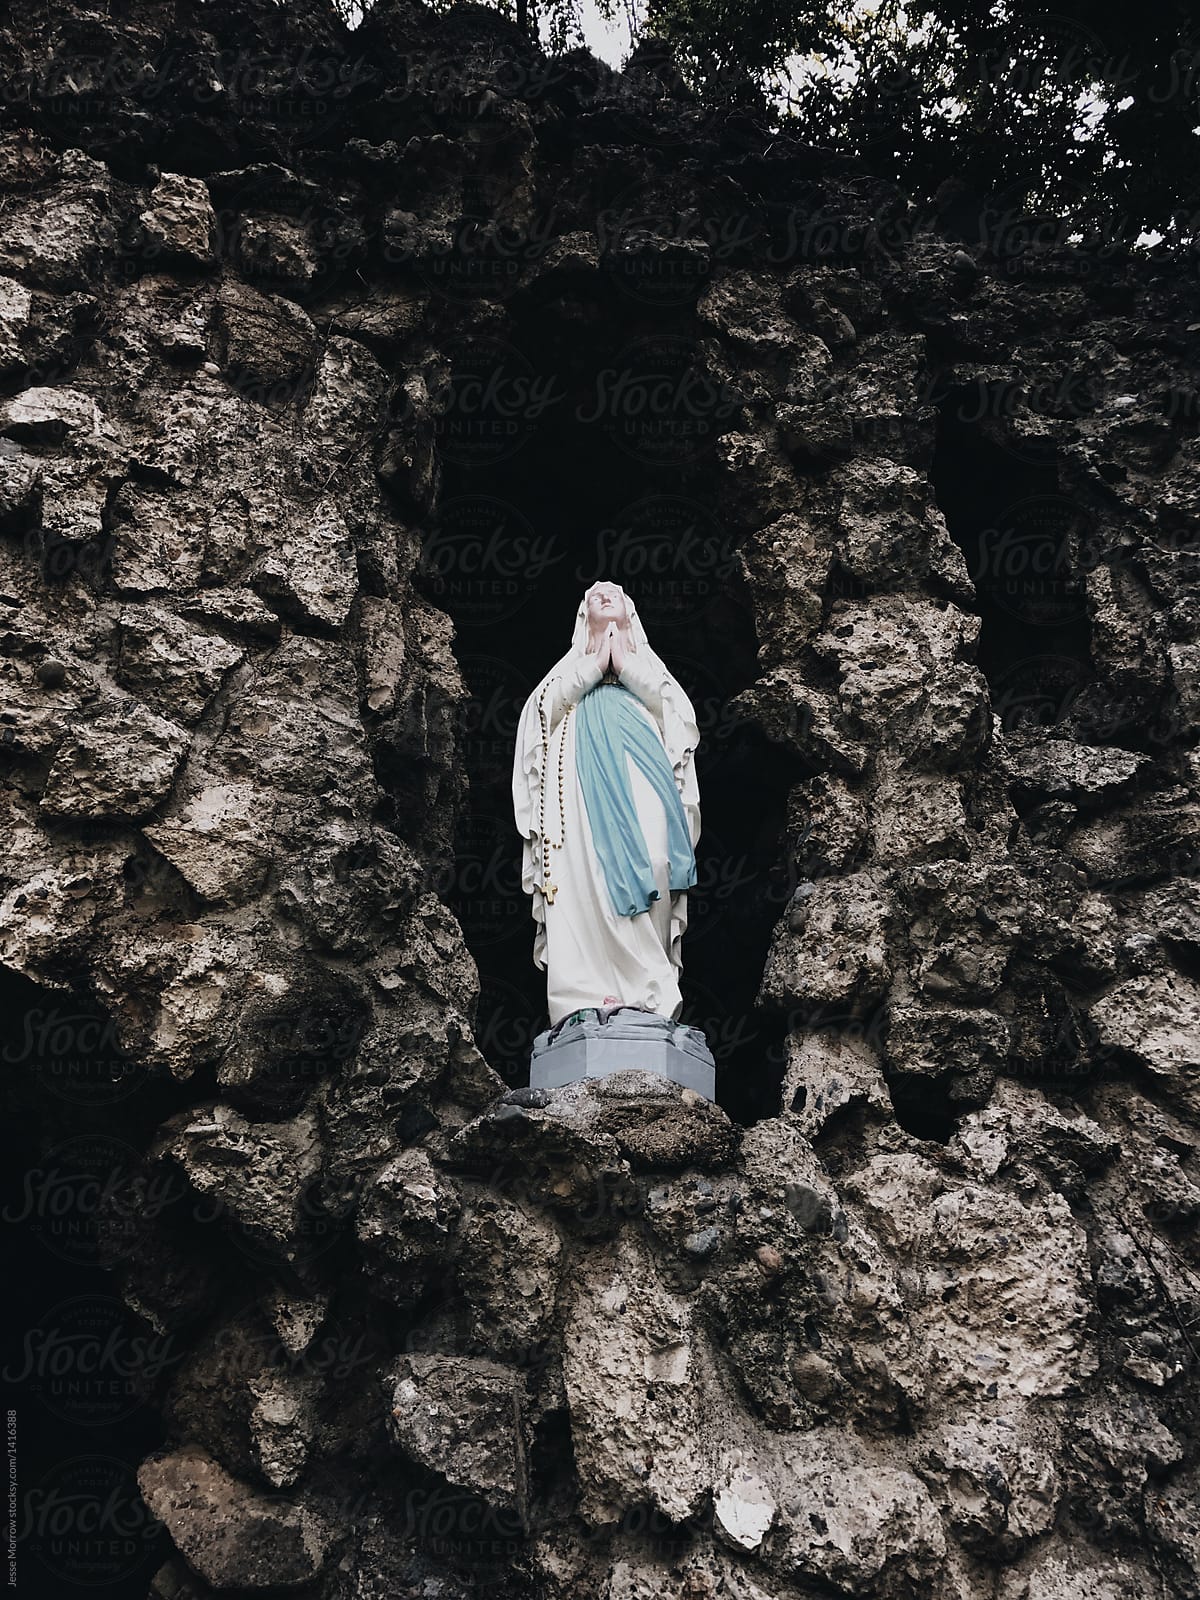 mother mary catholic christian symbolism statue in rock on hillside